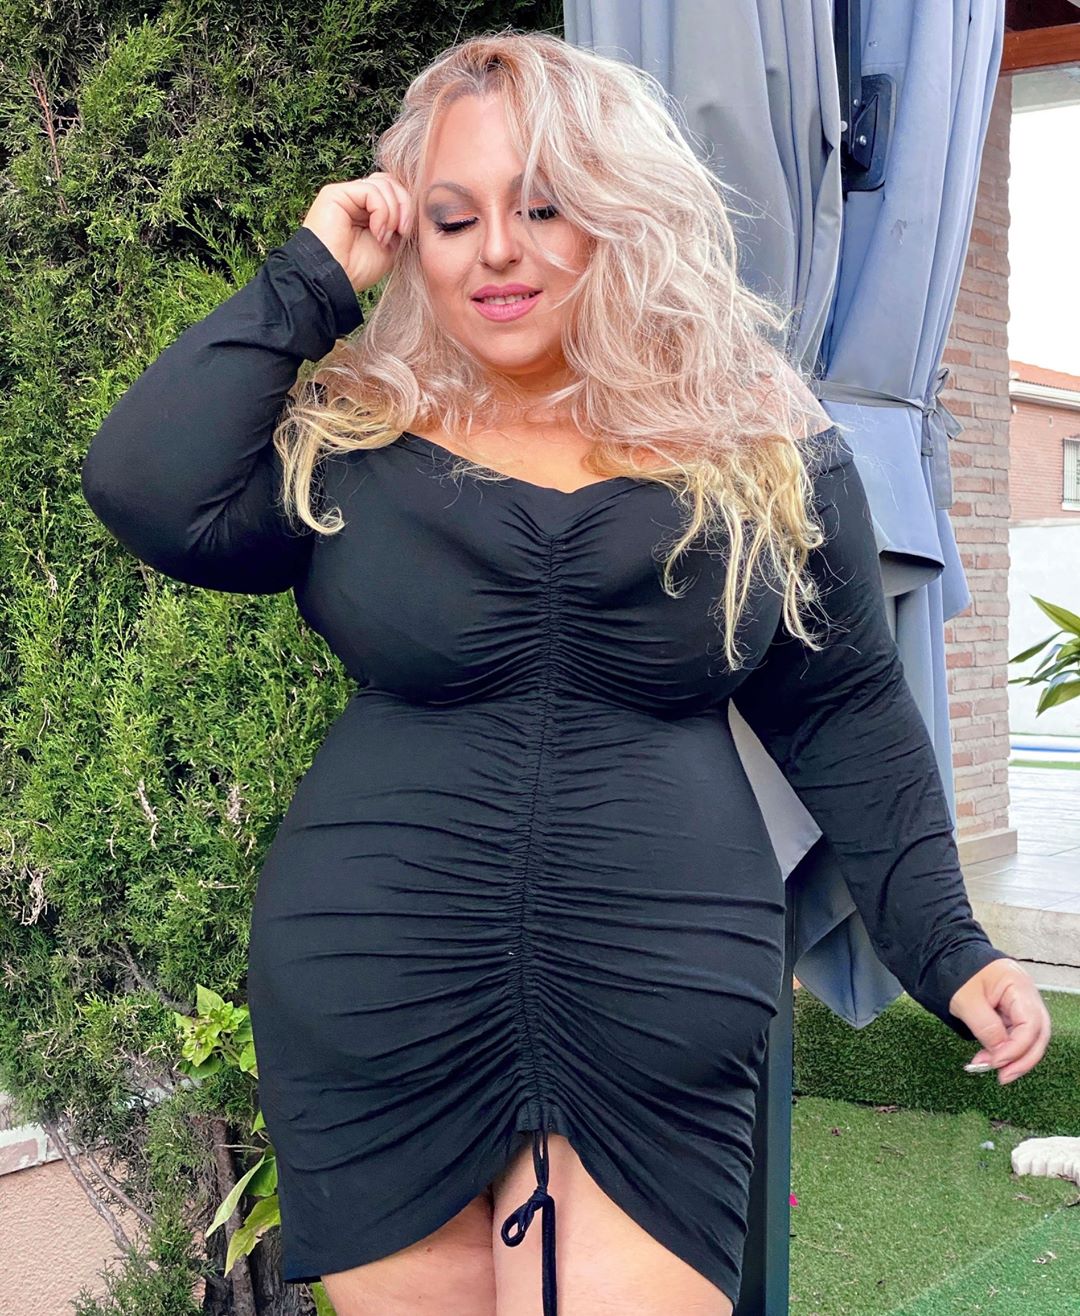 Rosegal - Get ready for Halloween!⁣
⁣
👉Bio link⁣
Plus Size Off Shoulder Ruched Bodycon Dress⁣
Search ID: 298868304⁣
Price: $25.91⁣
Use Code: RGH20 to enjoy 18% off!⁣
#rosegal #plussizefashion #Rosegal...